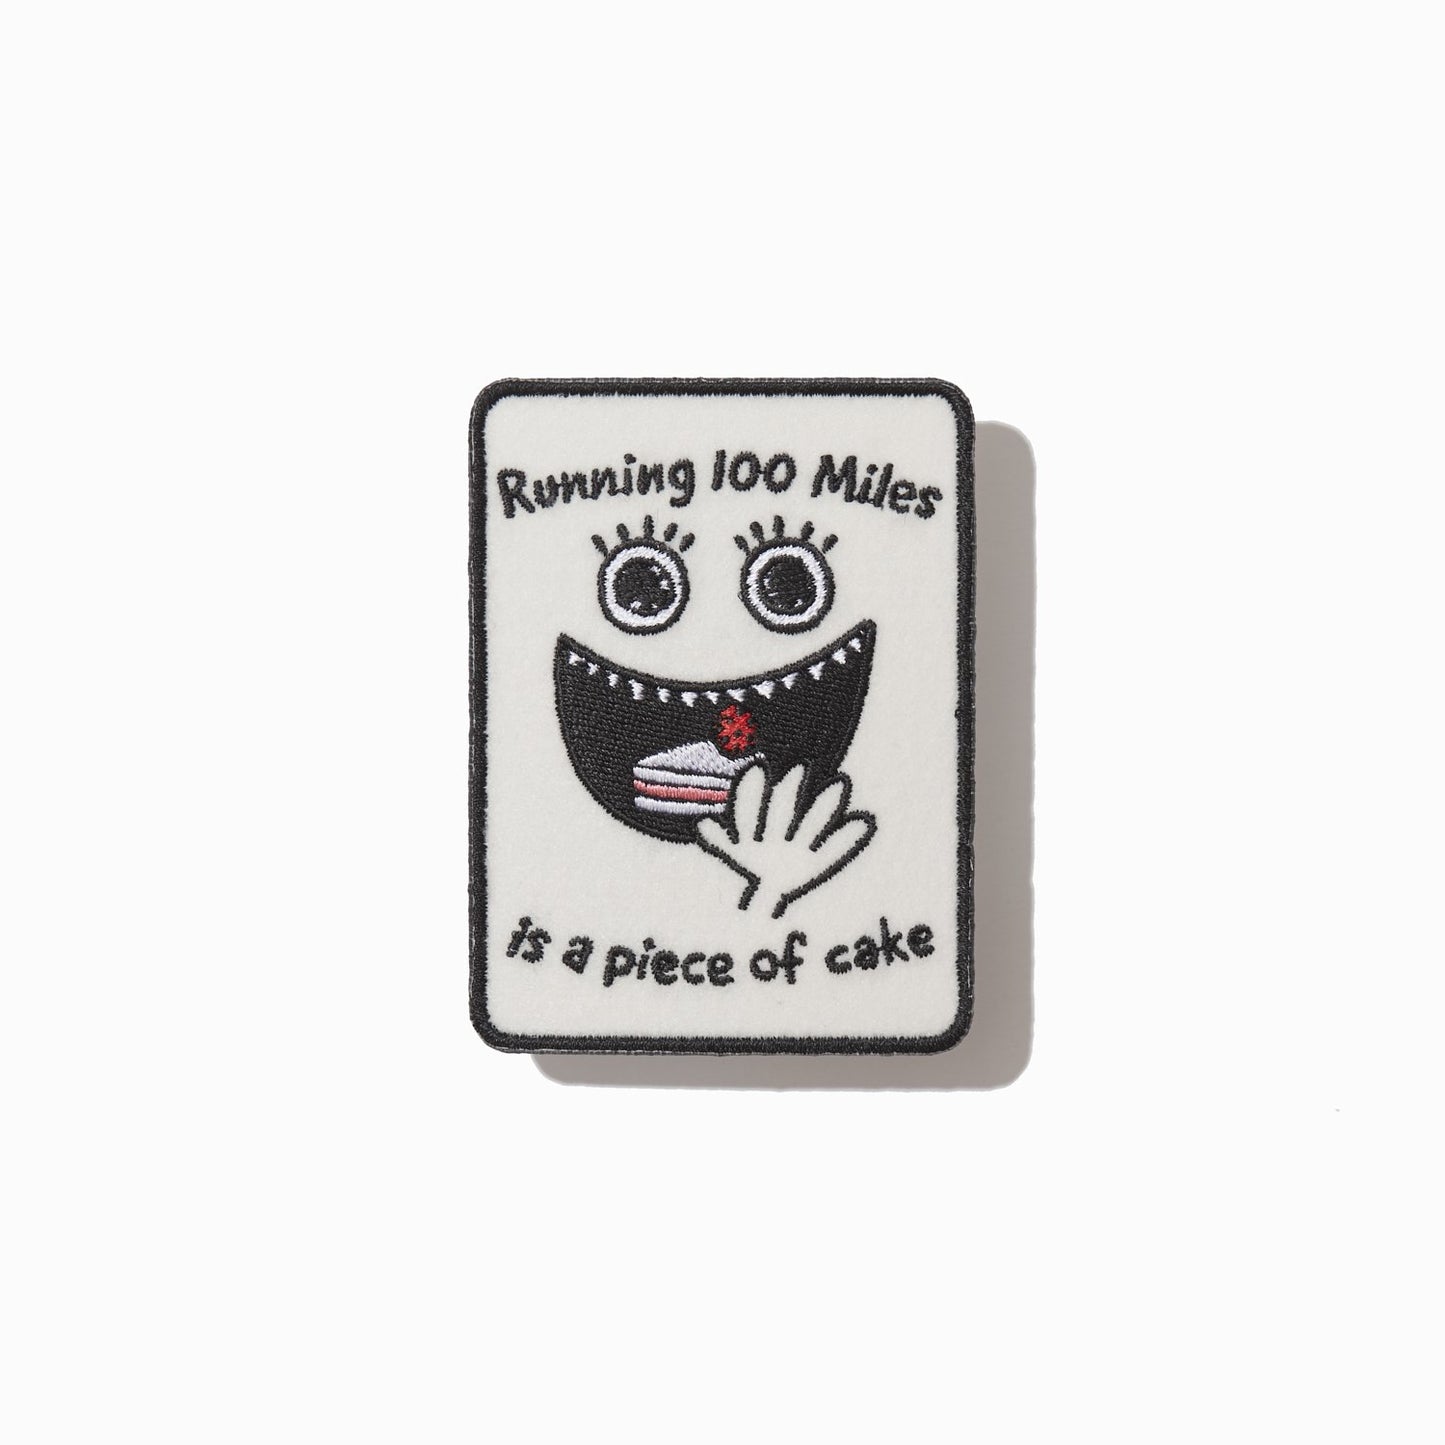 Tomo's Pit - Running 100 Miles is a Piece of Cake - Sticker/Cloth Patch Set